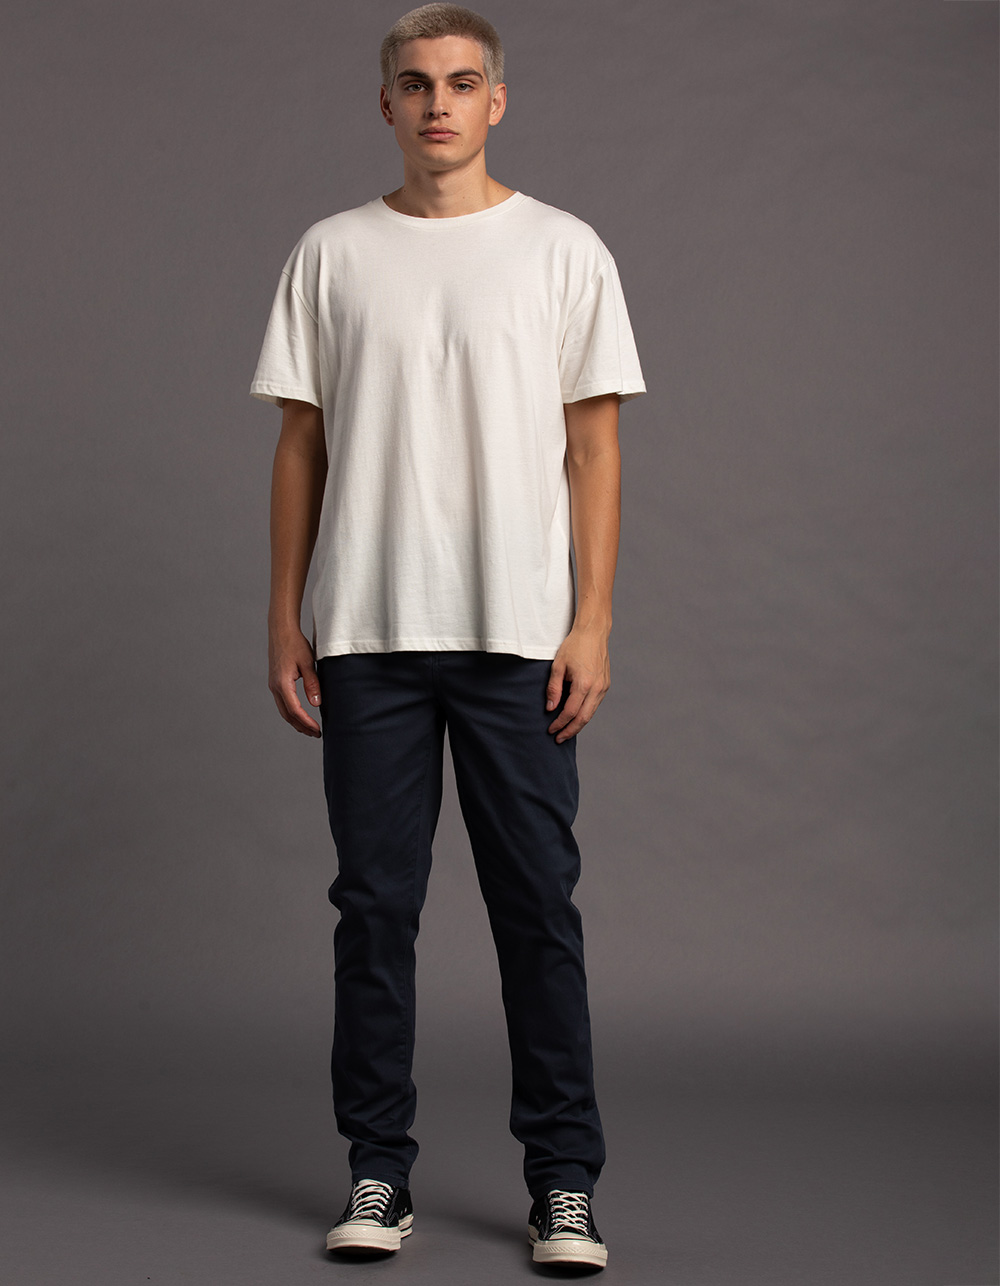 Rsq Slim Chino Pants Washed Navy at  Men's Clothing store